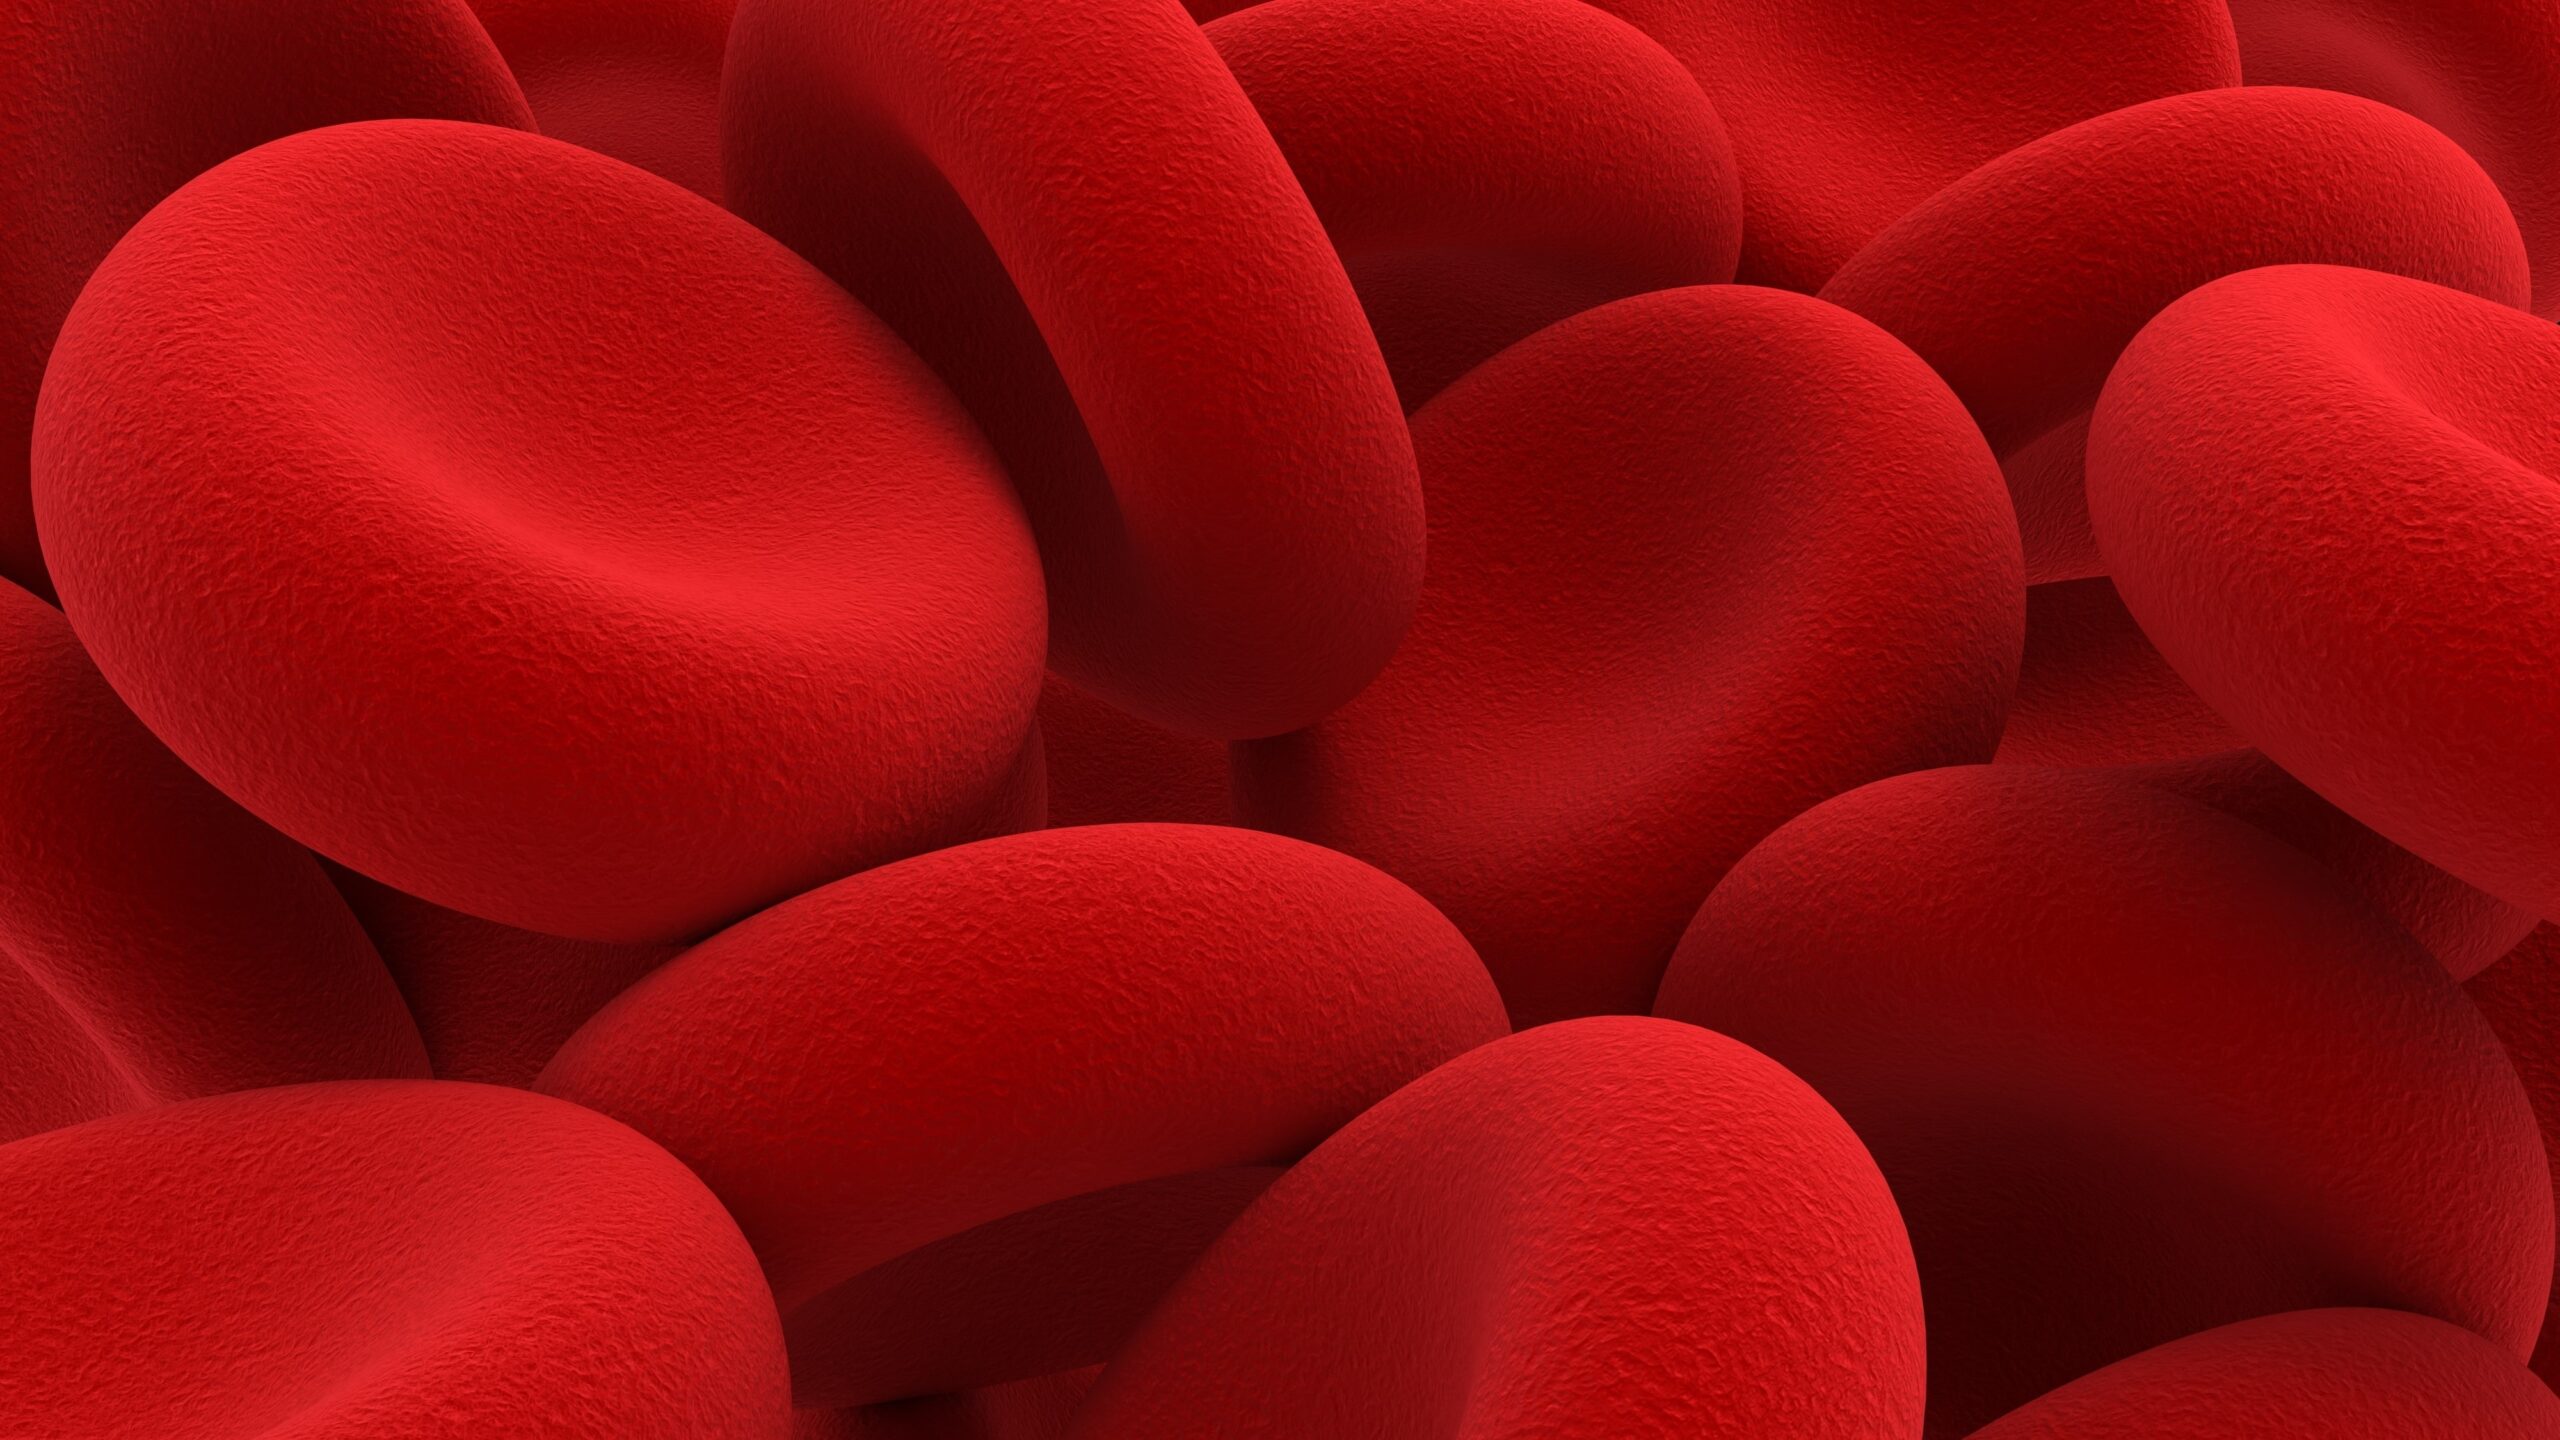 Iptacopan Monotherapy Effectively Treats Persistent Anemia in PNH